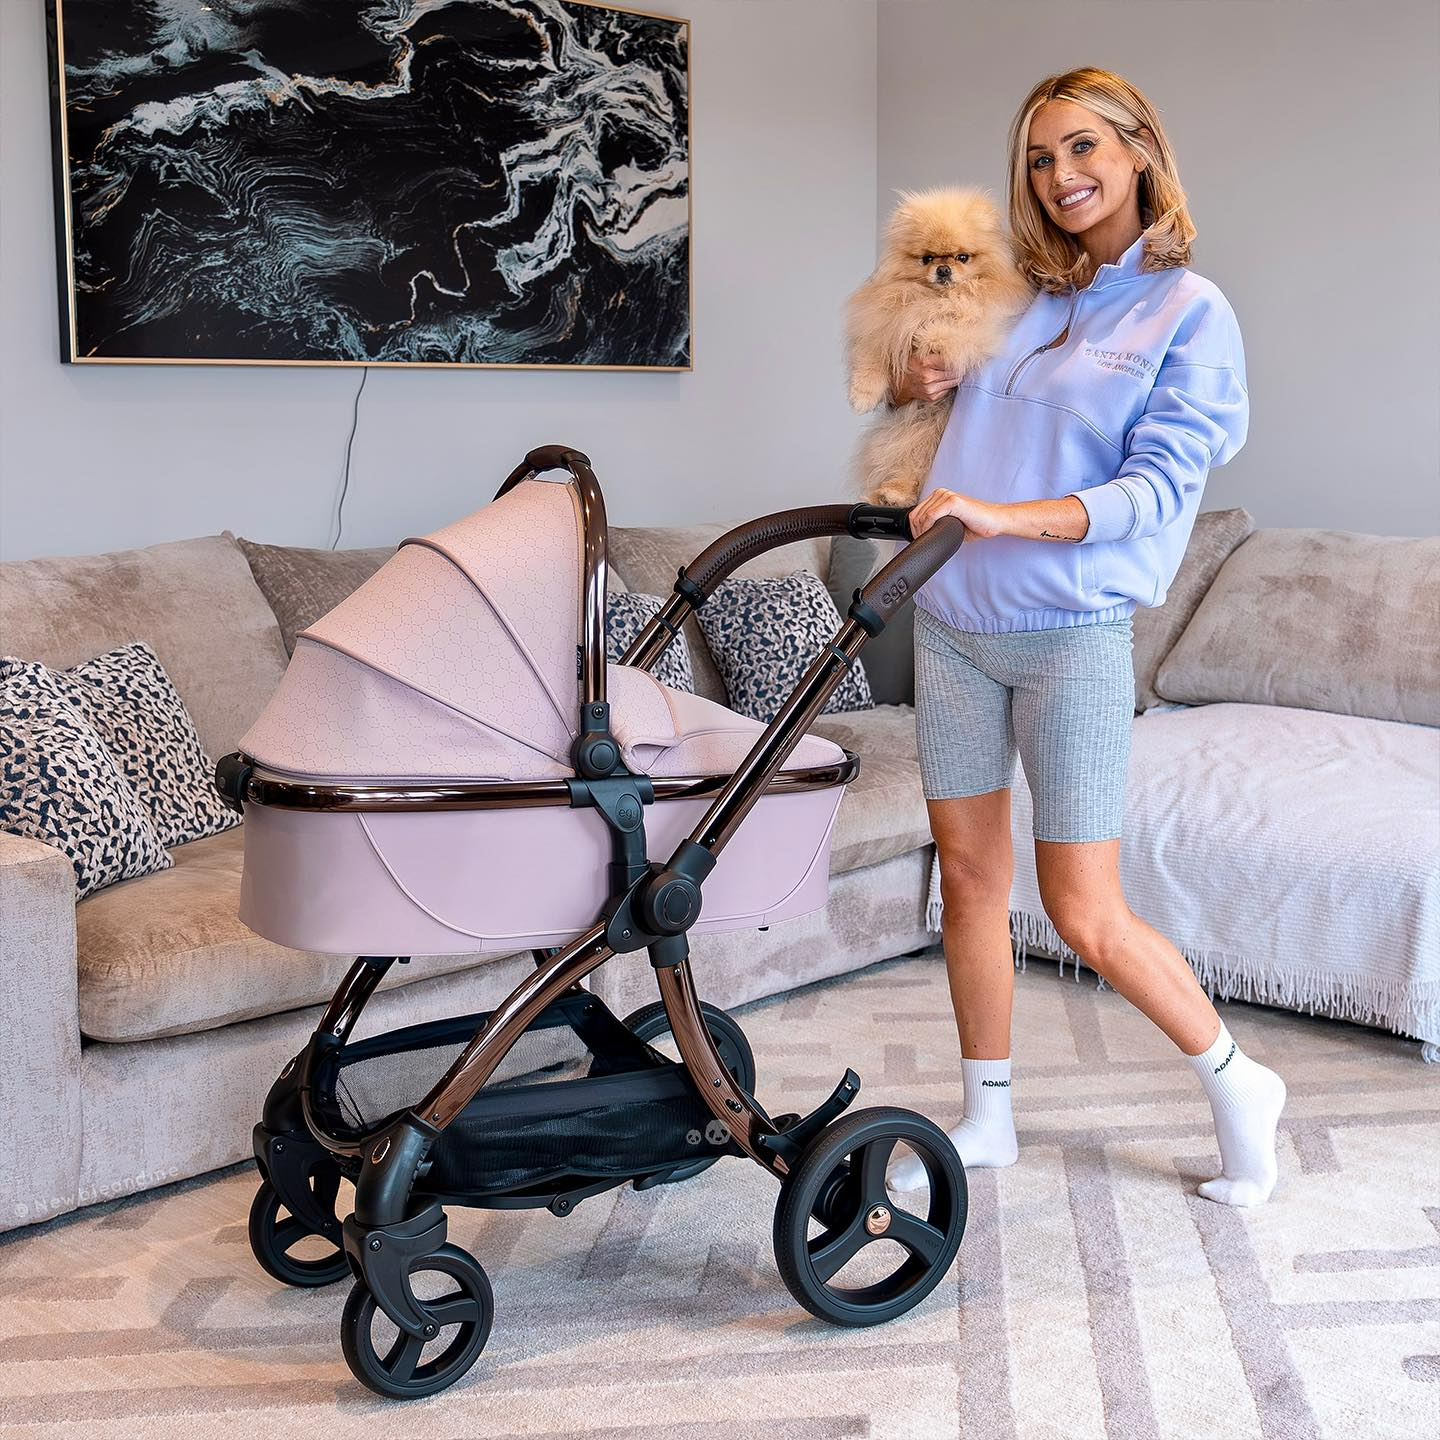 Love Island’s Laura Anderson cruelly mum-shamed as she shows off new pram days before giving birth